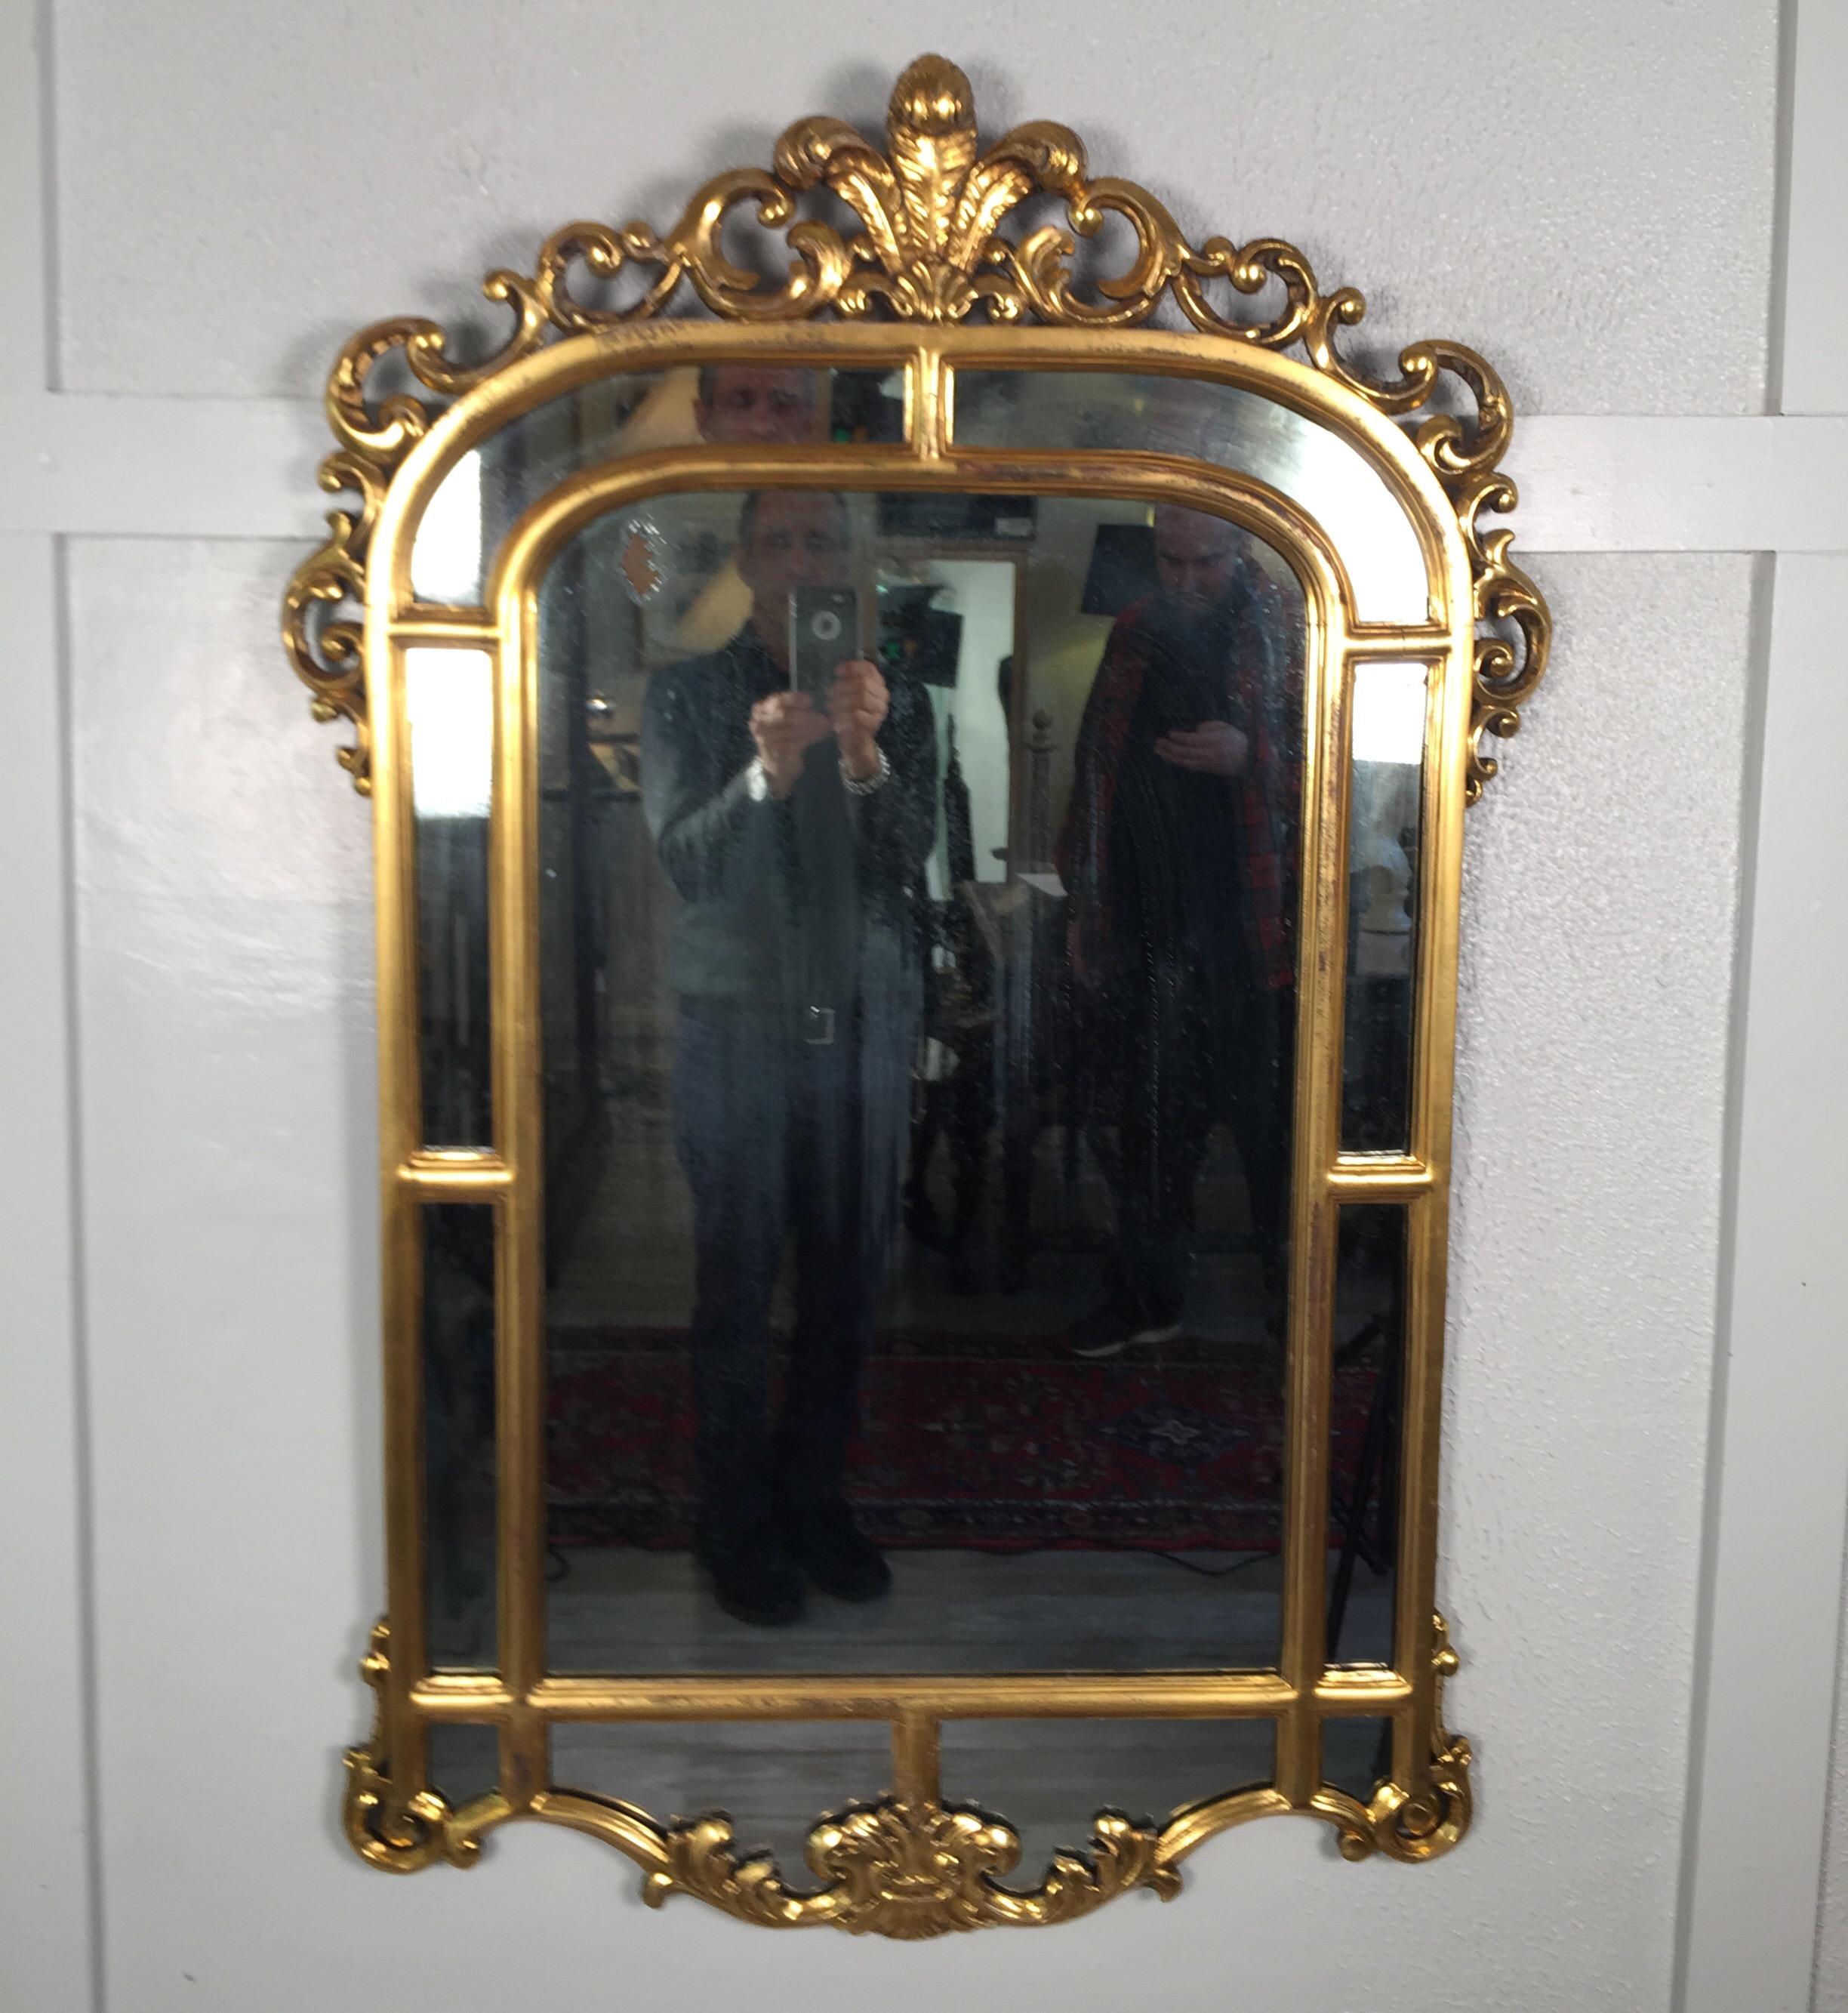 Gold gilt French style mirror in original condition, mirror has age appropriate loses to the silver. Nice gilt mirror in original condition for the purist, circa 1890s.
Dimensions: 33